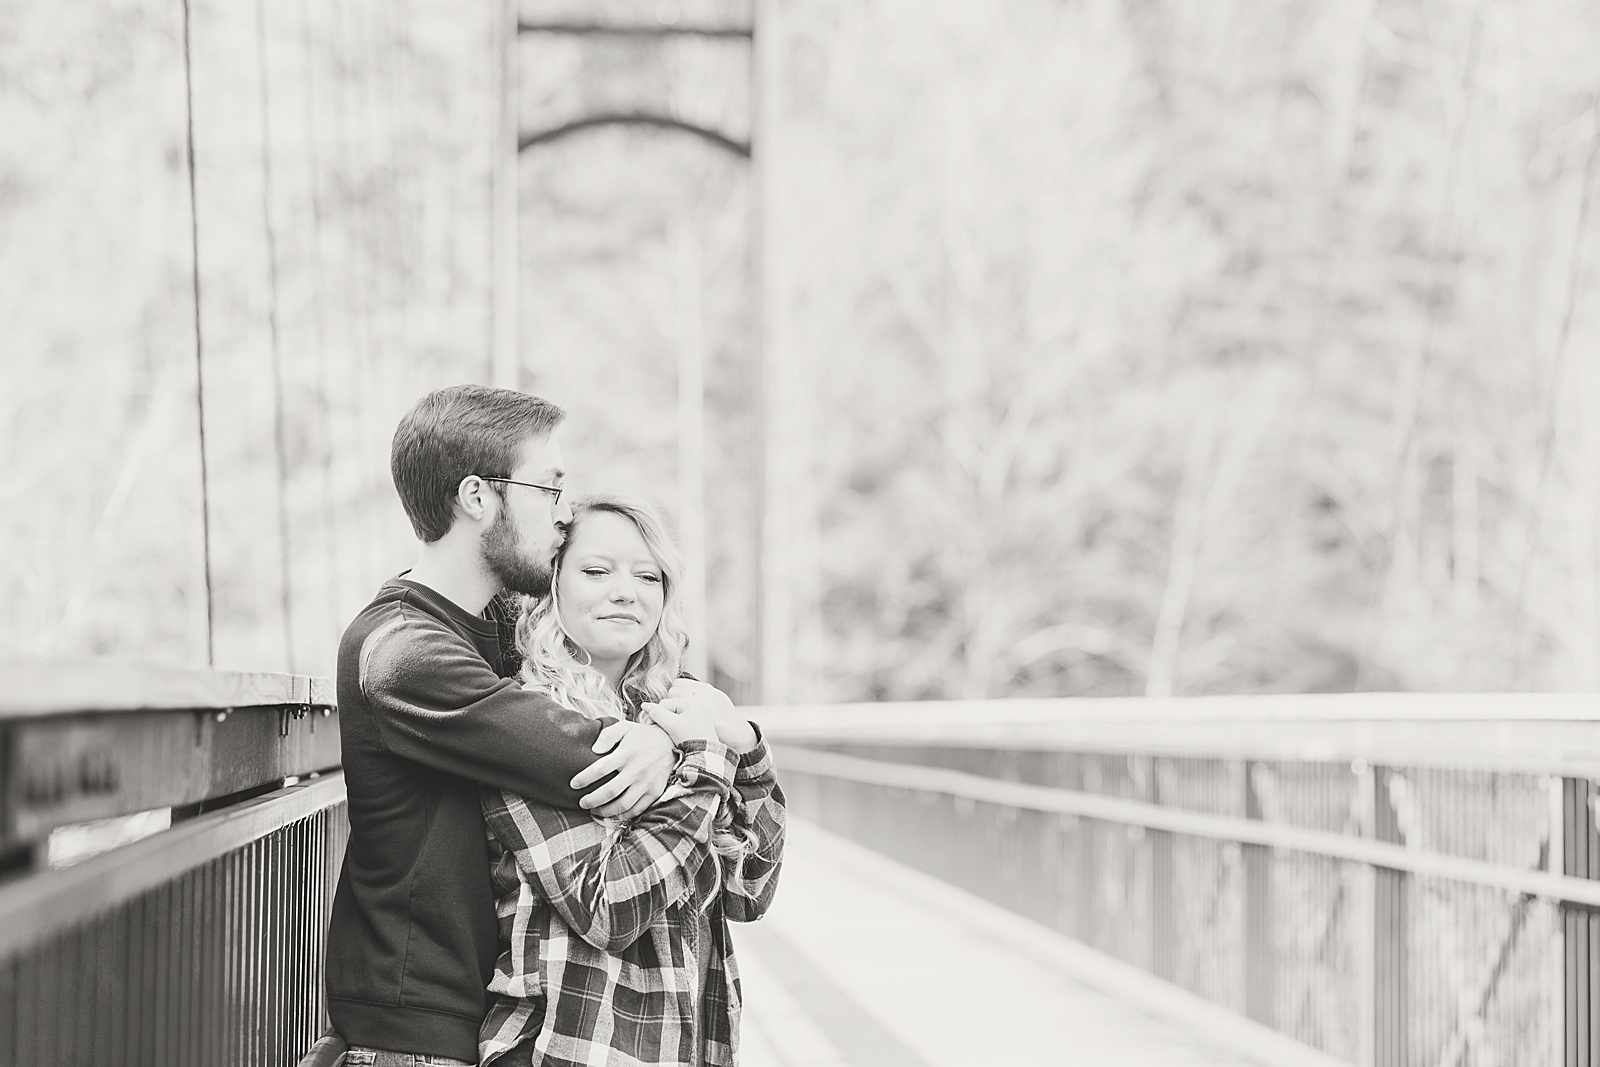 Ocoee River Engagement Session Black and White of Cody and Haley hugging on bridge Photo